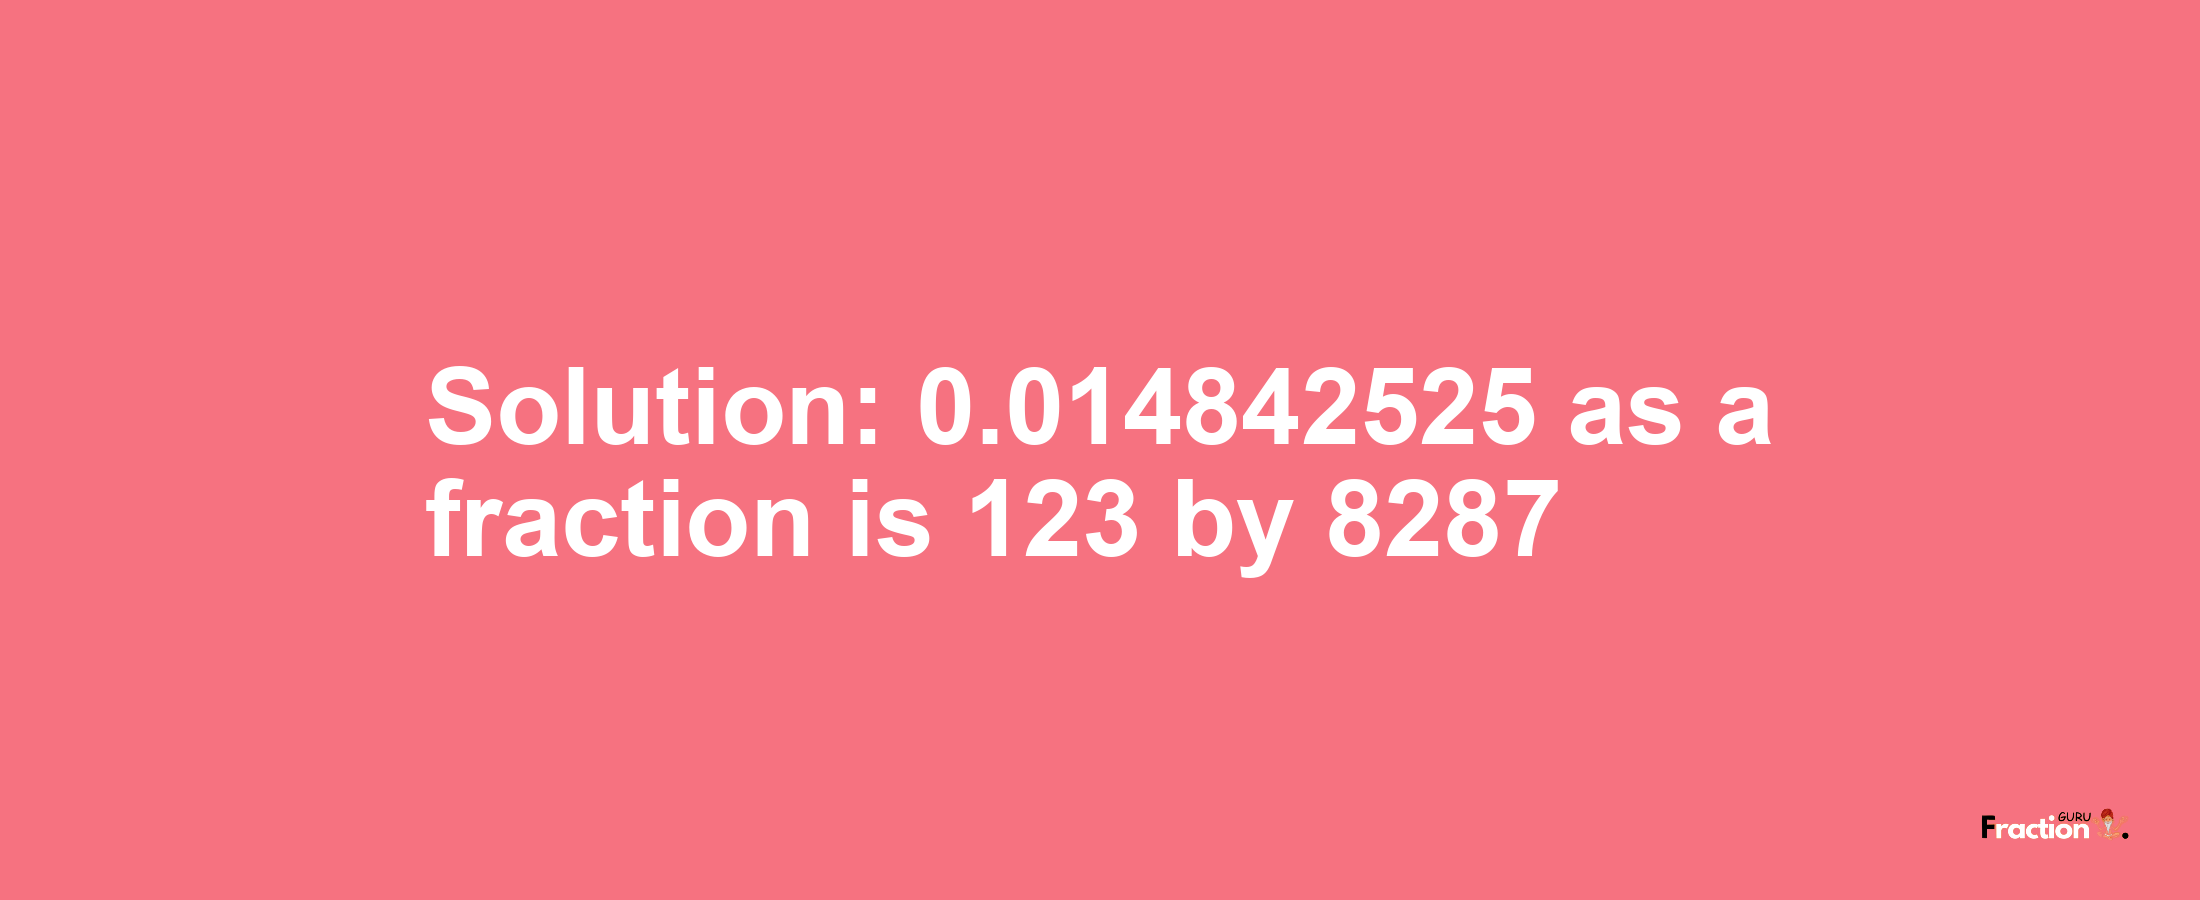 Solution:0.014842525 as a fraction is 123/8287